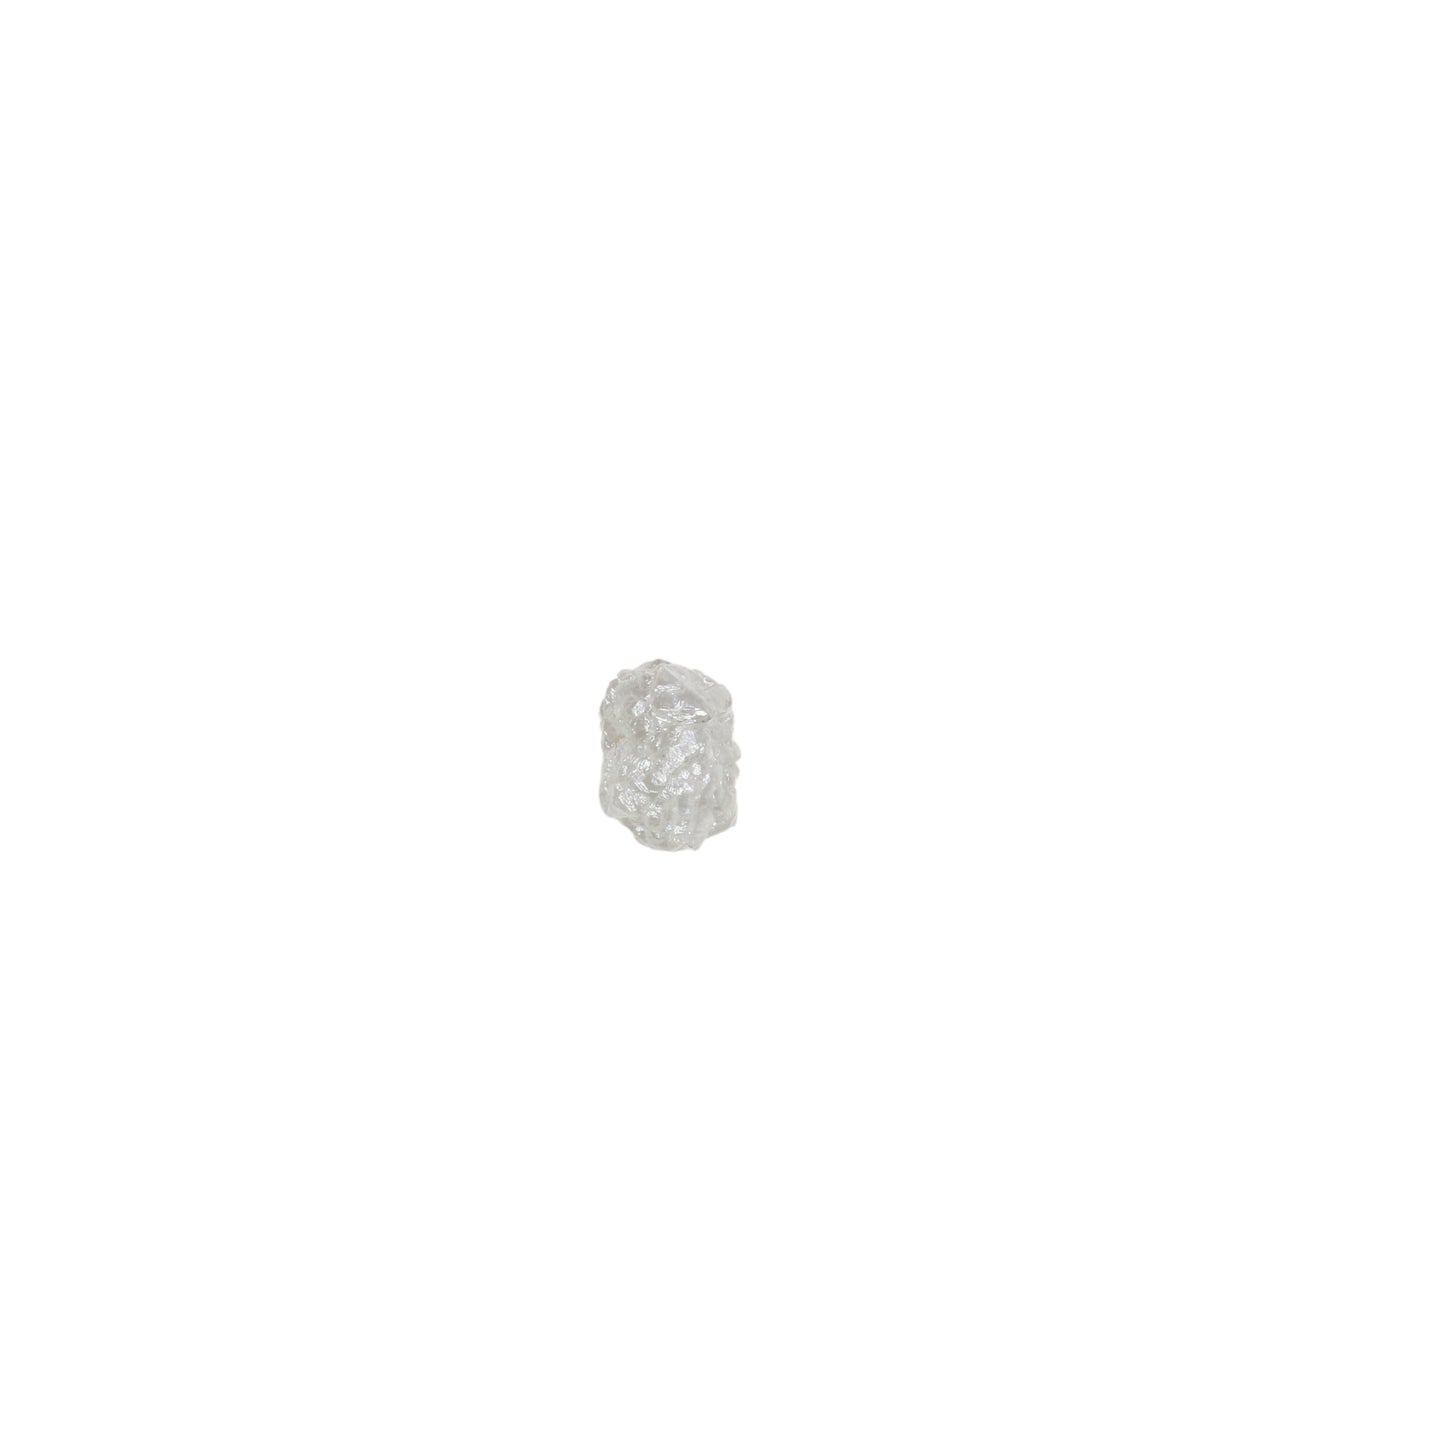 0.88 CT Snow White Rough Uncut Diamond For Wedding Ring | Gift For Her |Anniversary Gift